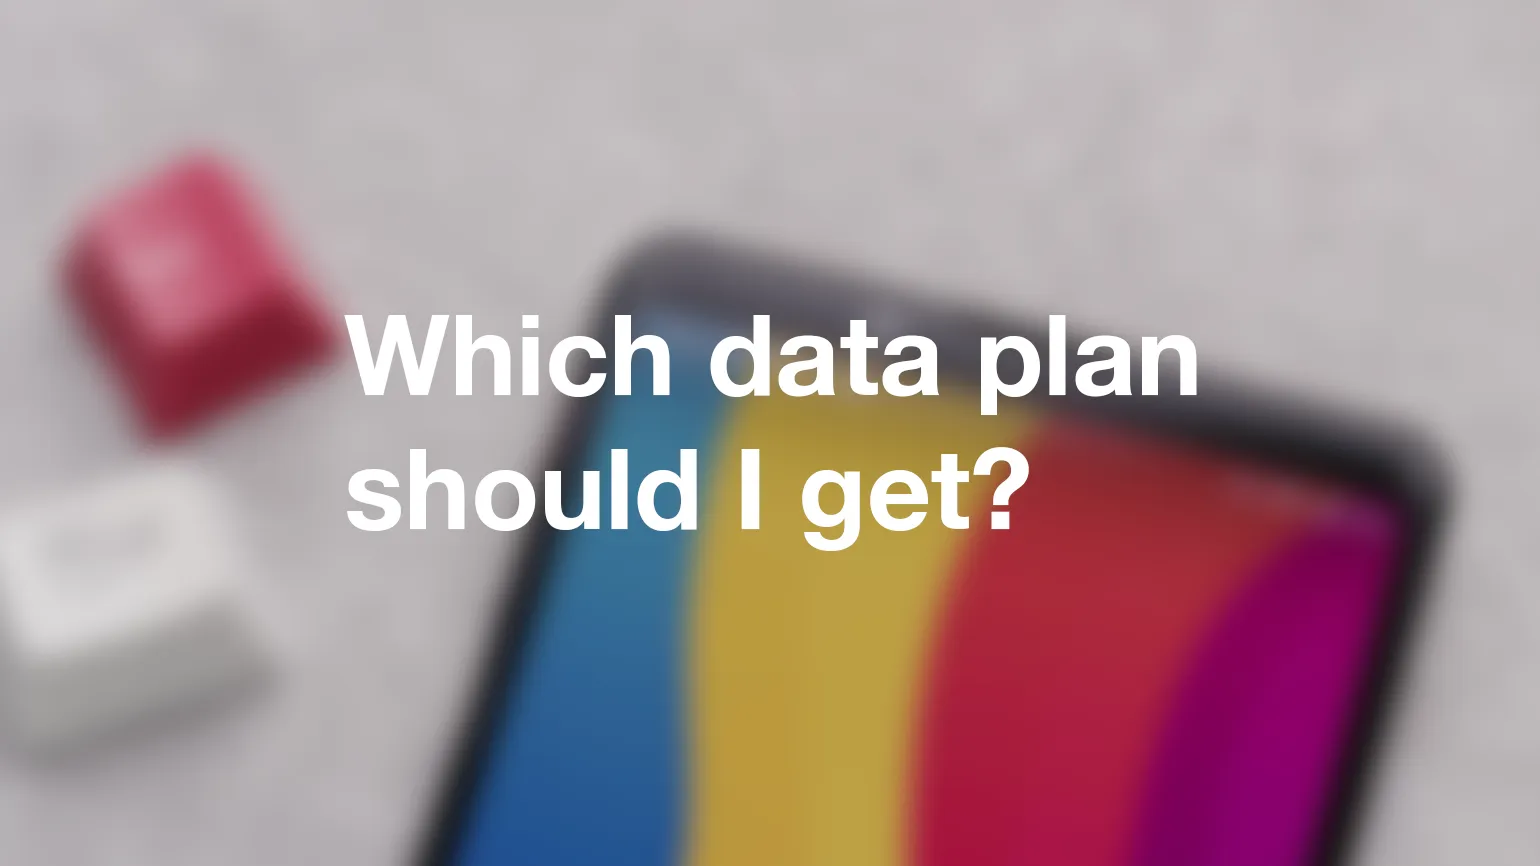 Which data plan should I get?